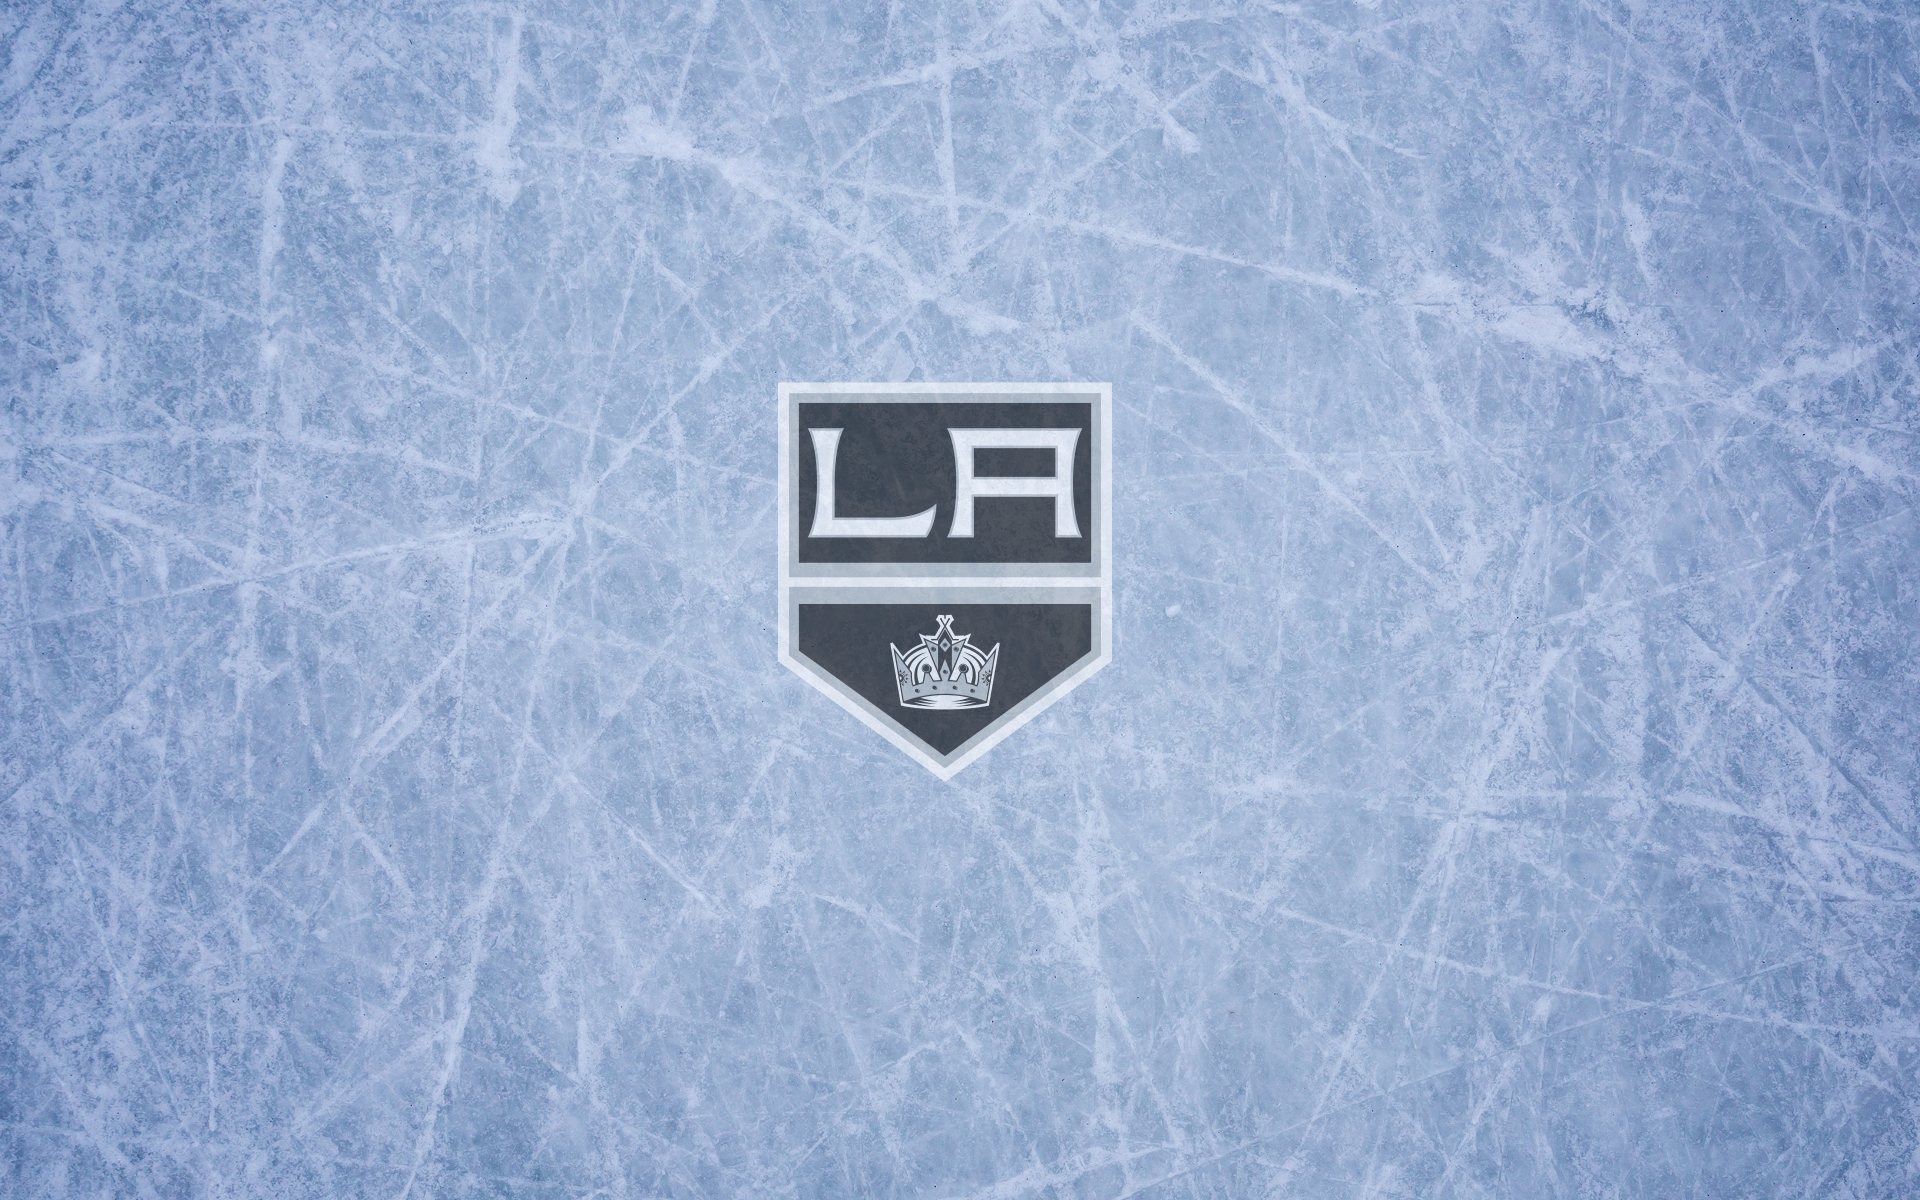 Los Angeles Kings wallpaper, ice and logo, widescreen 1920×1200